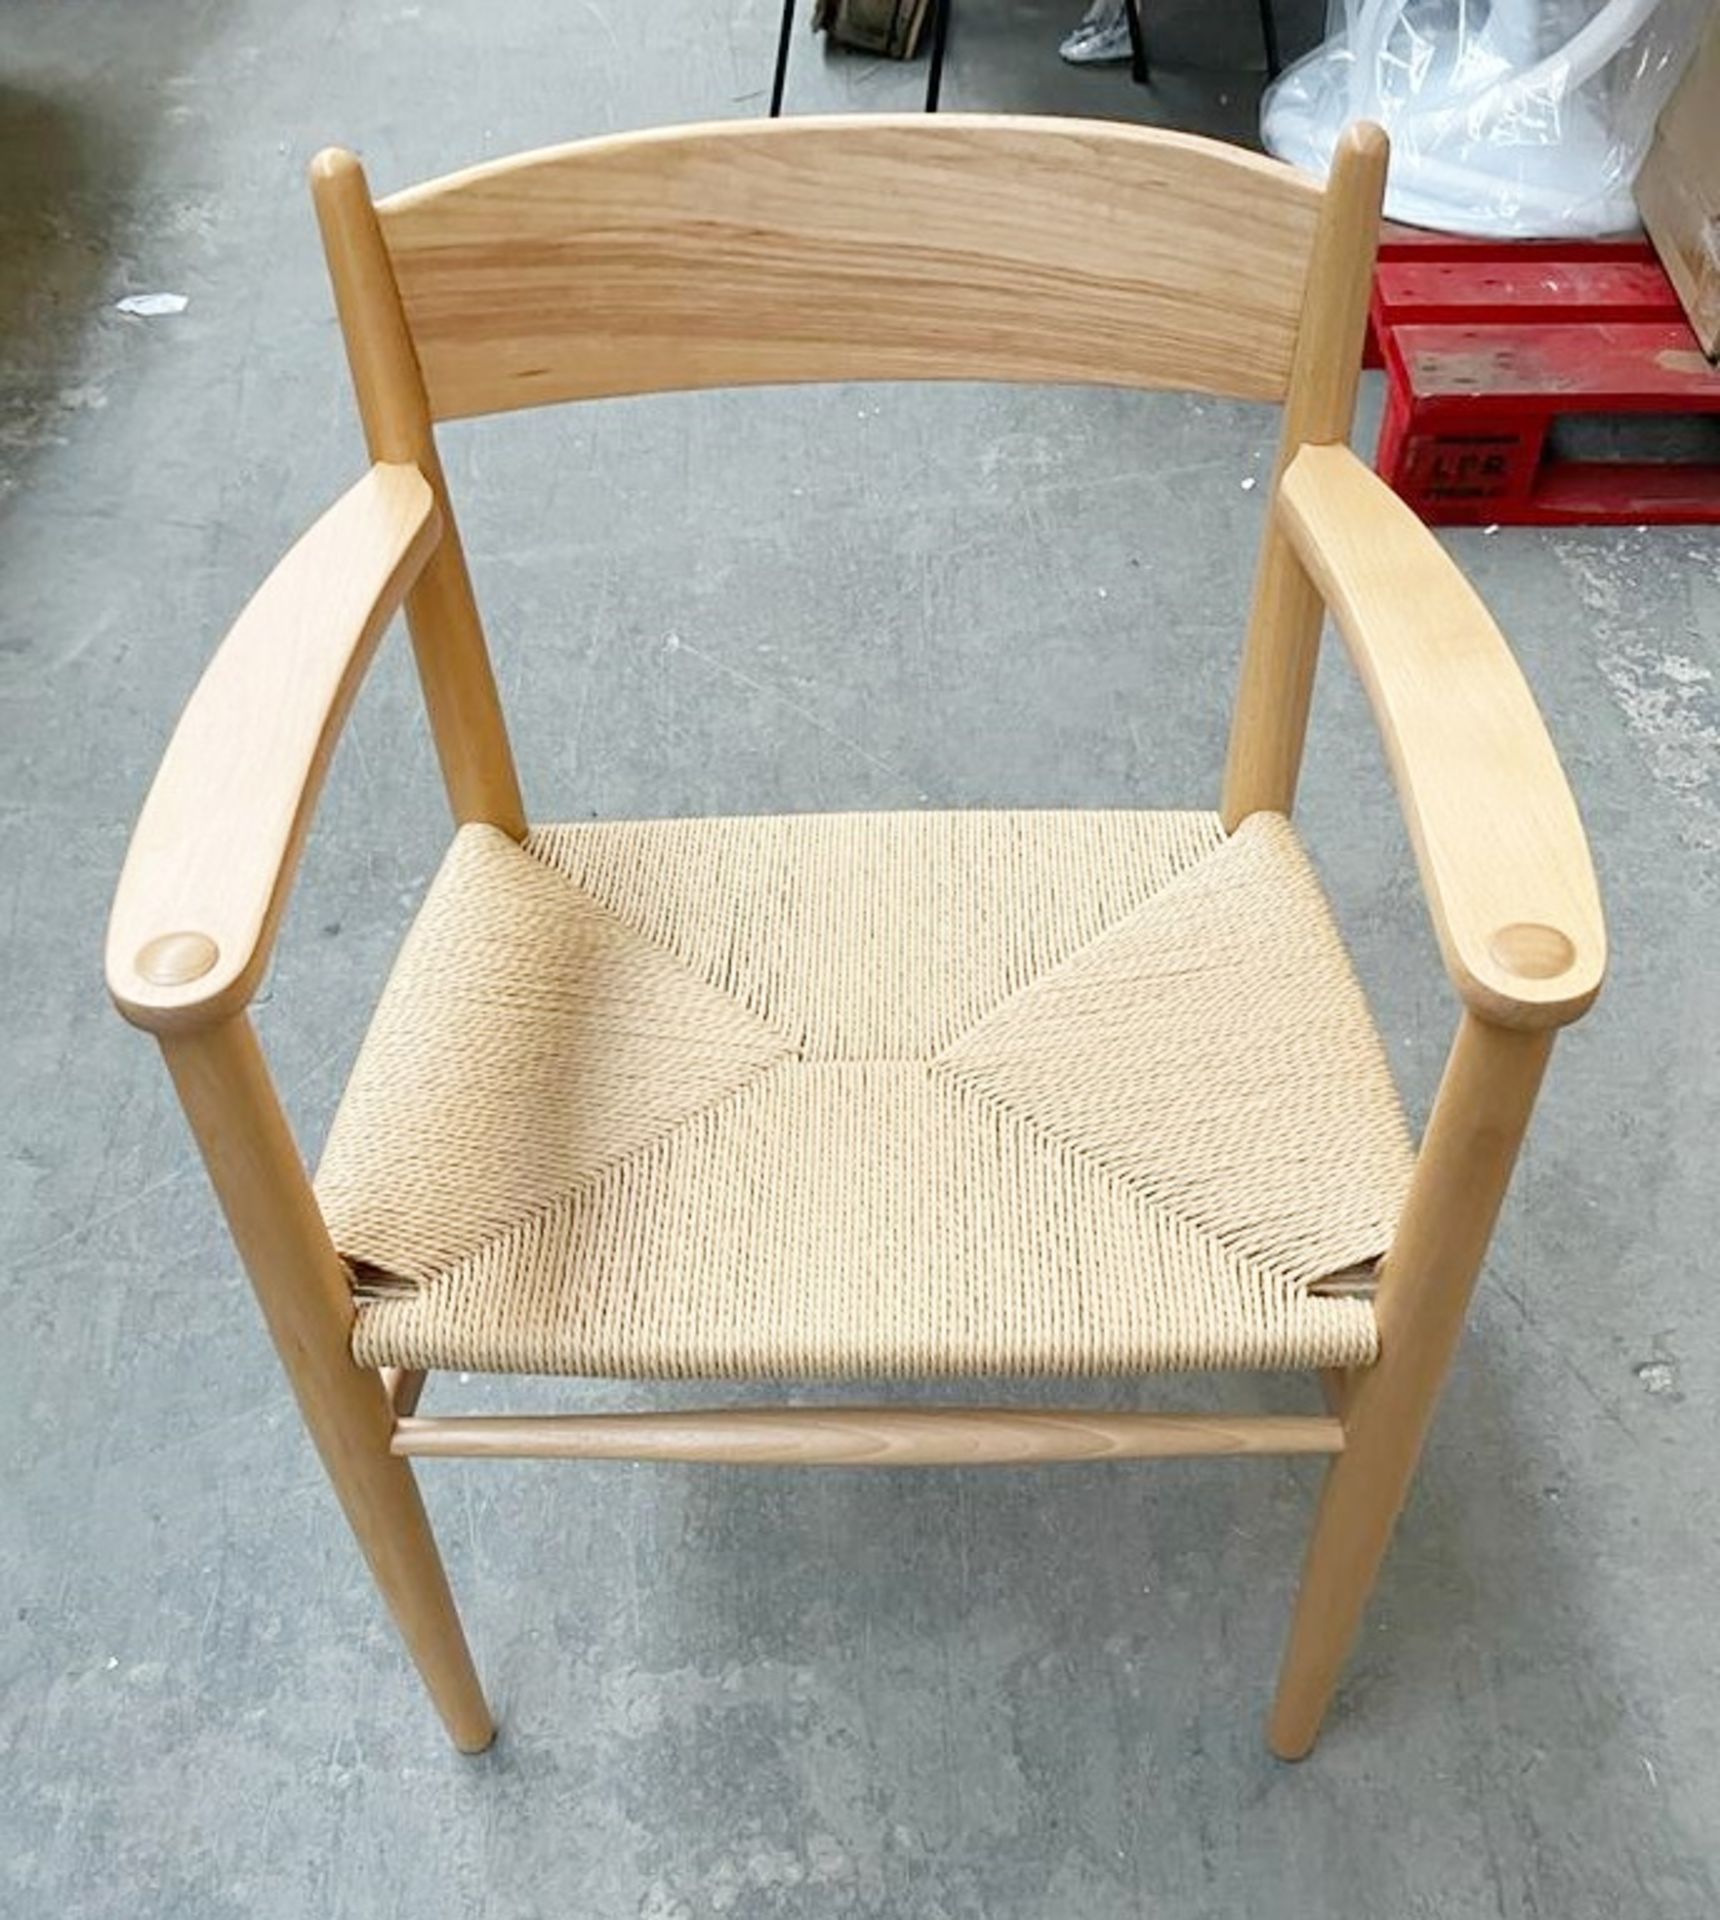 1 x Natural + Natural Cord Chair With Arm Rests - Dimensions: 50(h) x 48(d) x 58(w) cm - Brand New